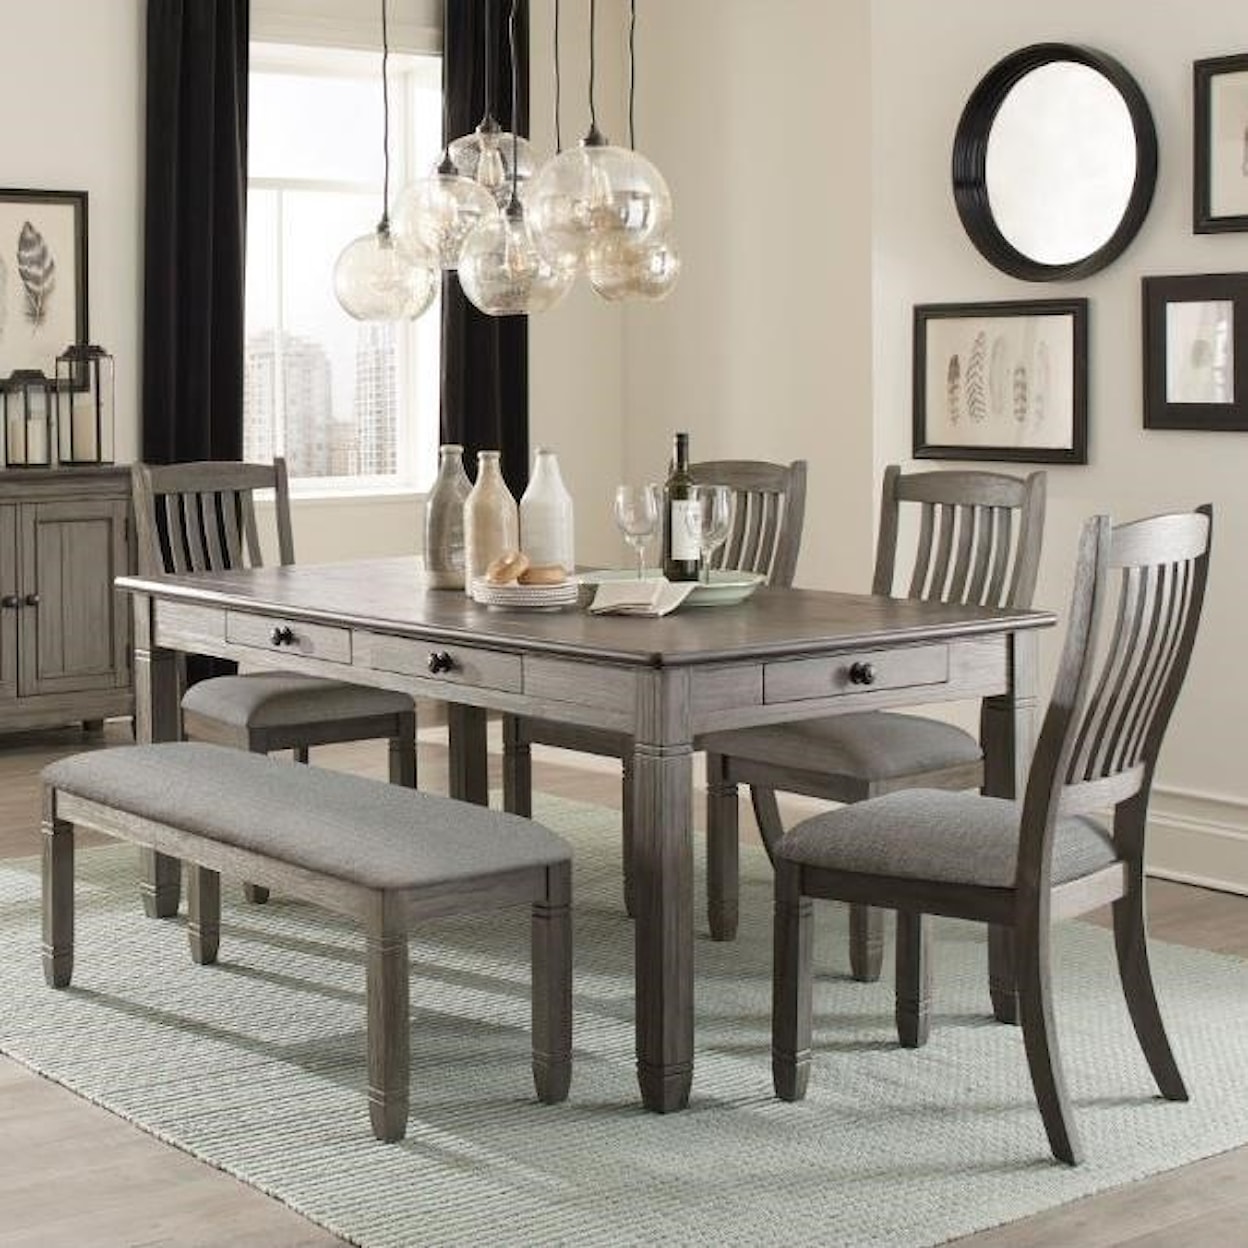 Homelegance Furniture Granby 6-Piece Table and Chair Set with Bench